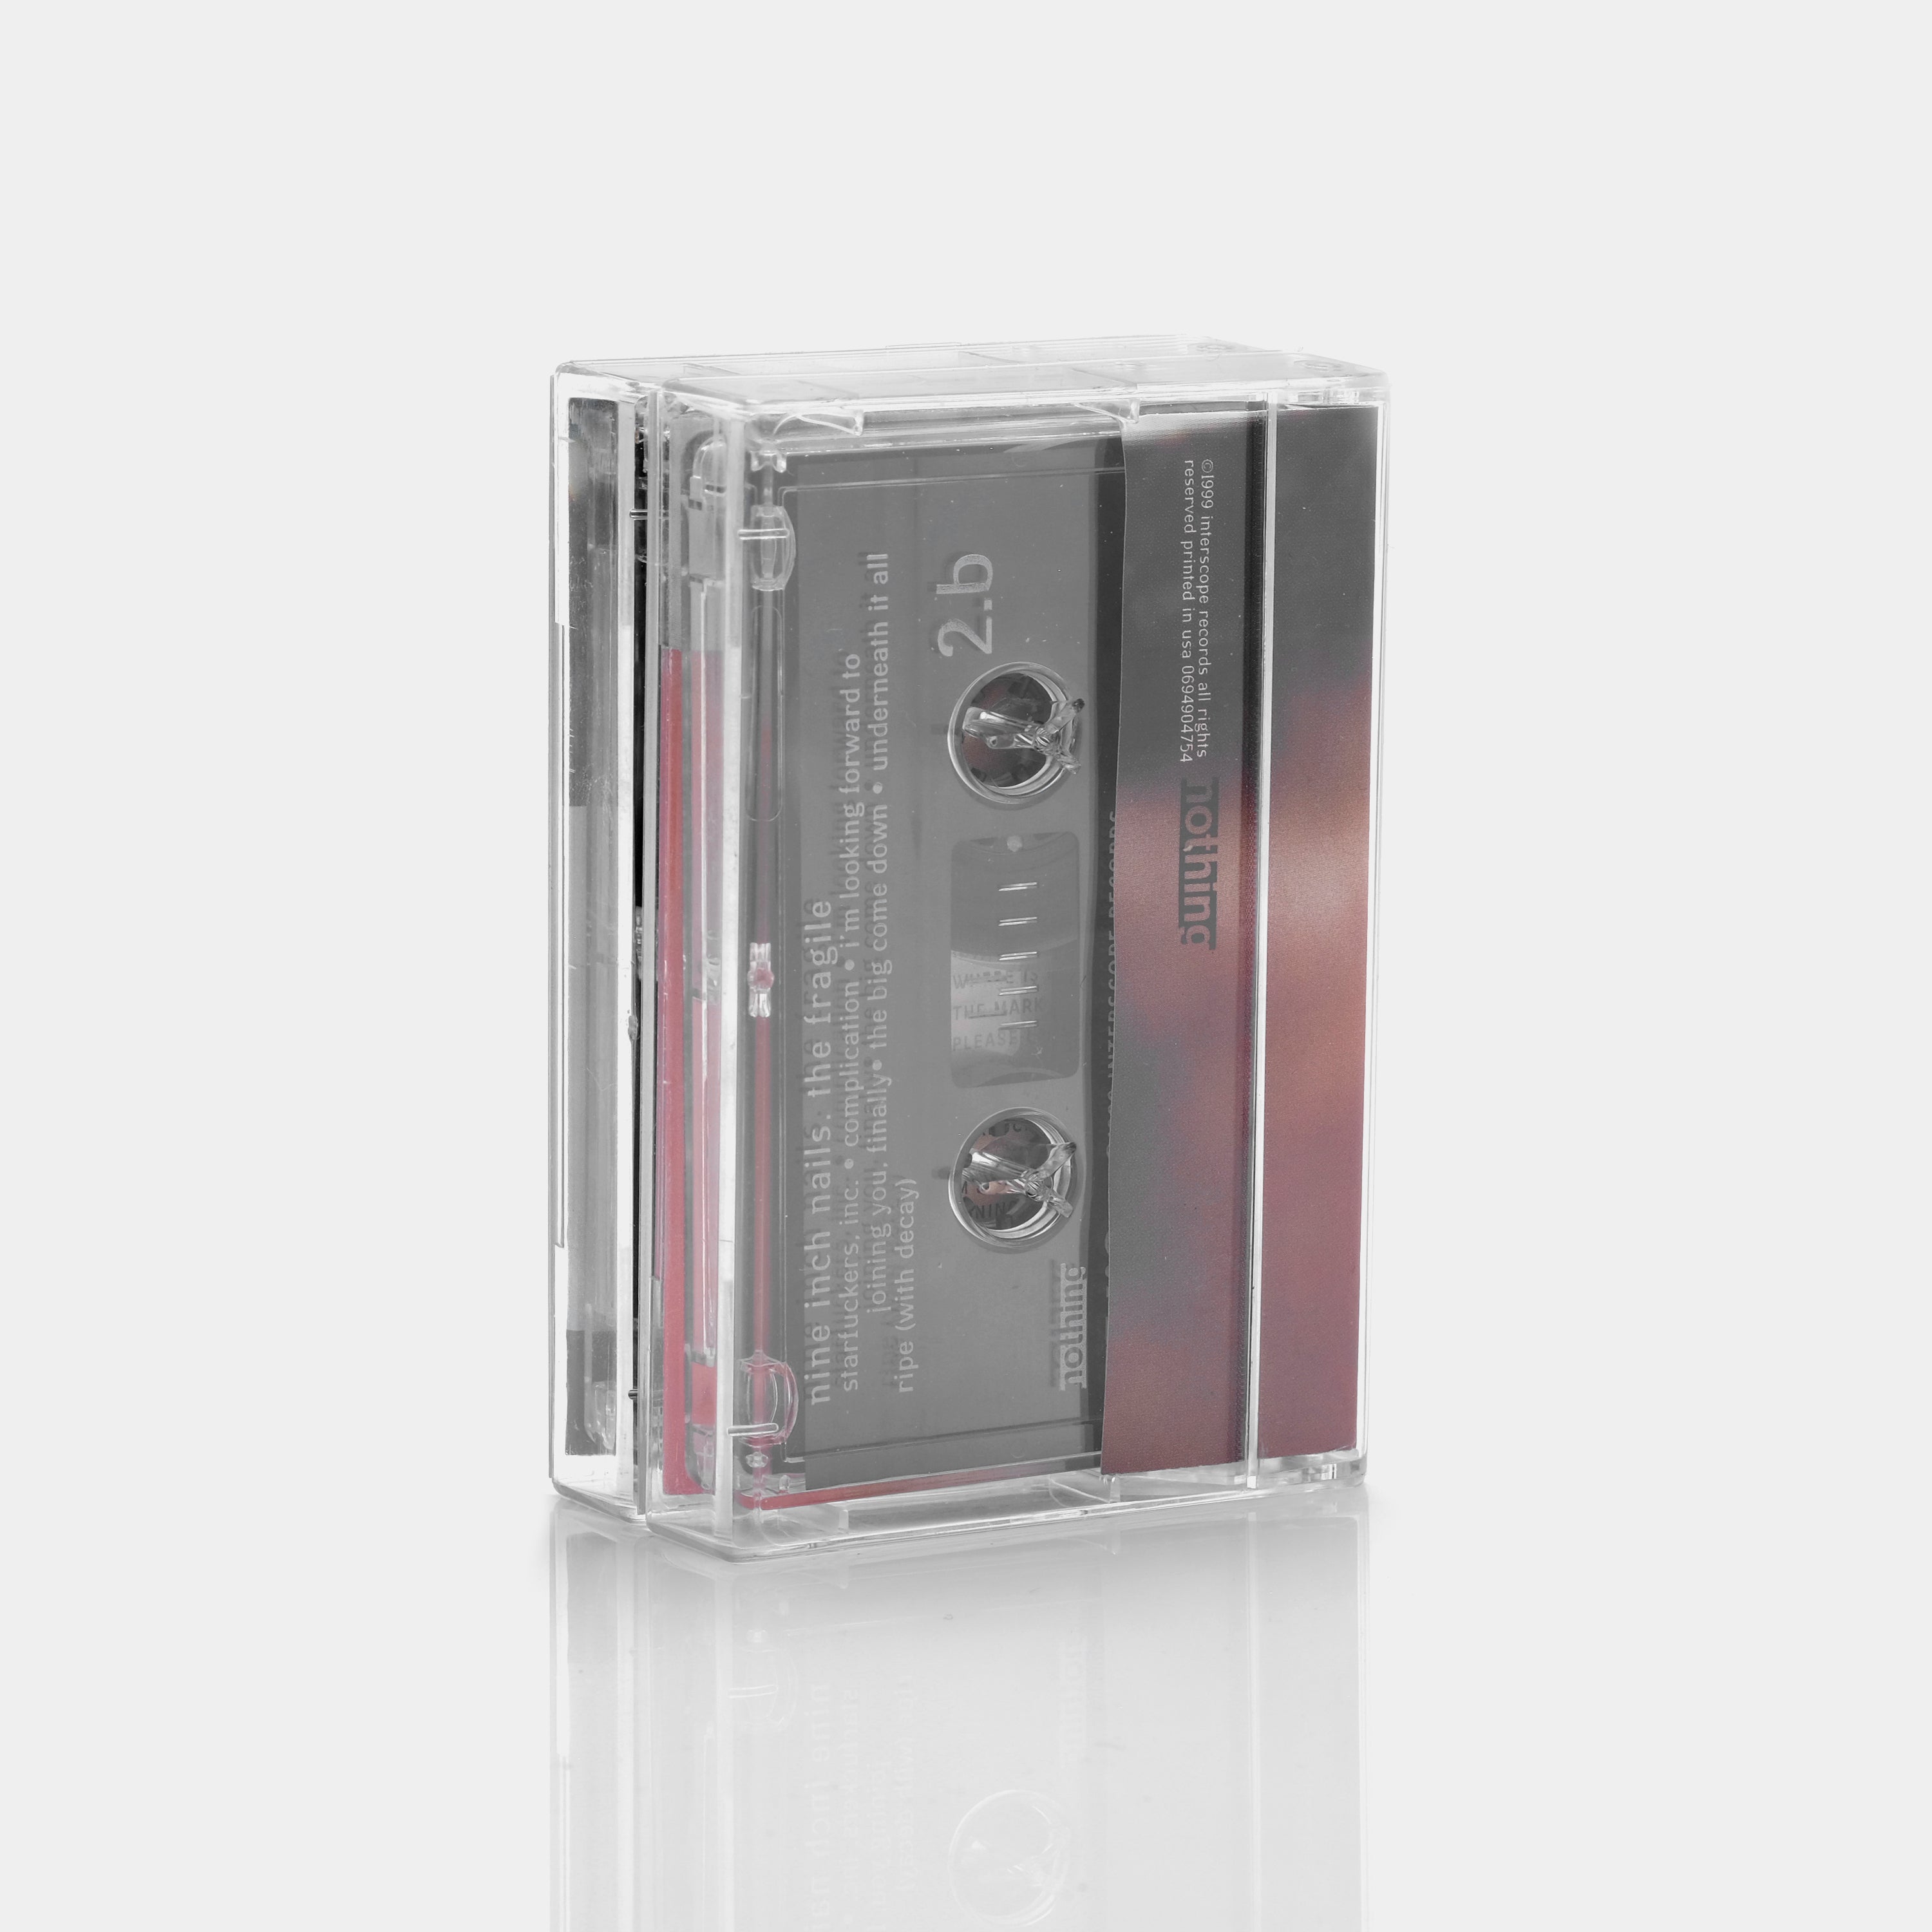 Nine Inch Nails - The Fragile Cassette Tapes